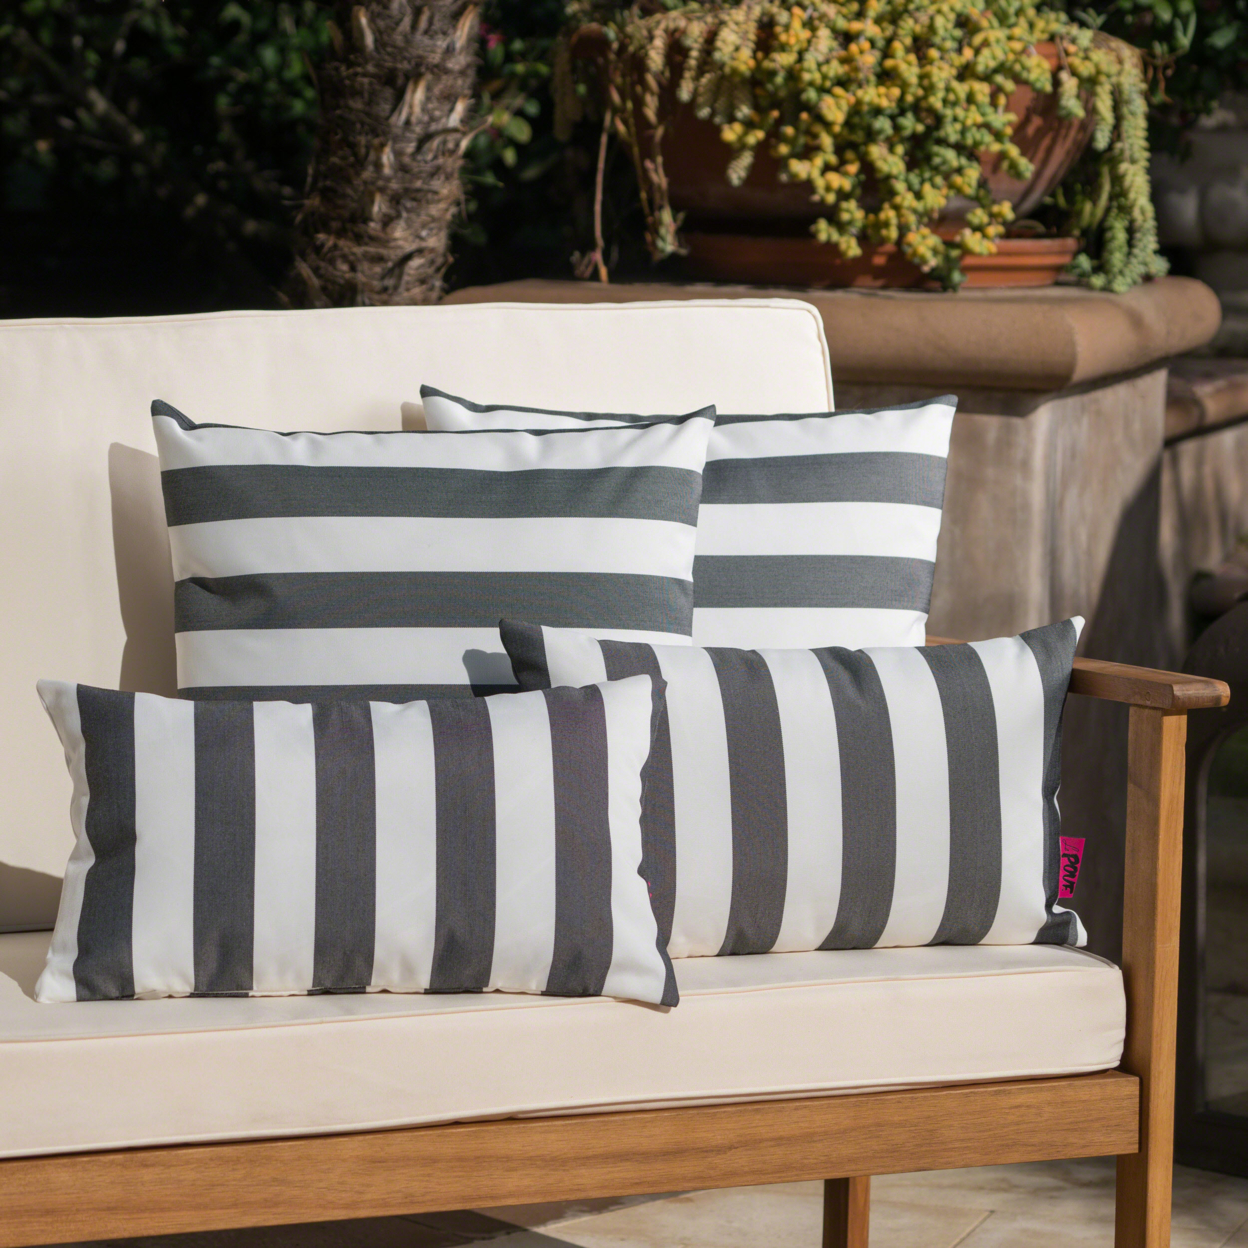 La Jolla Outdoor Water Resistant Square And Rectangular Throw Pillows - Set Of 4 - Black/White